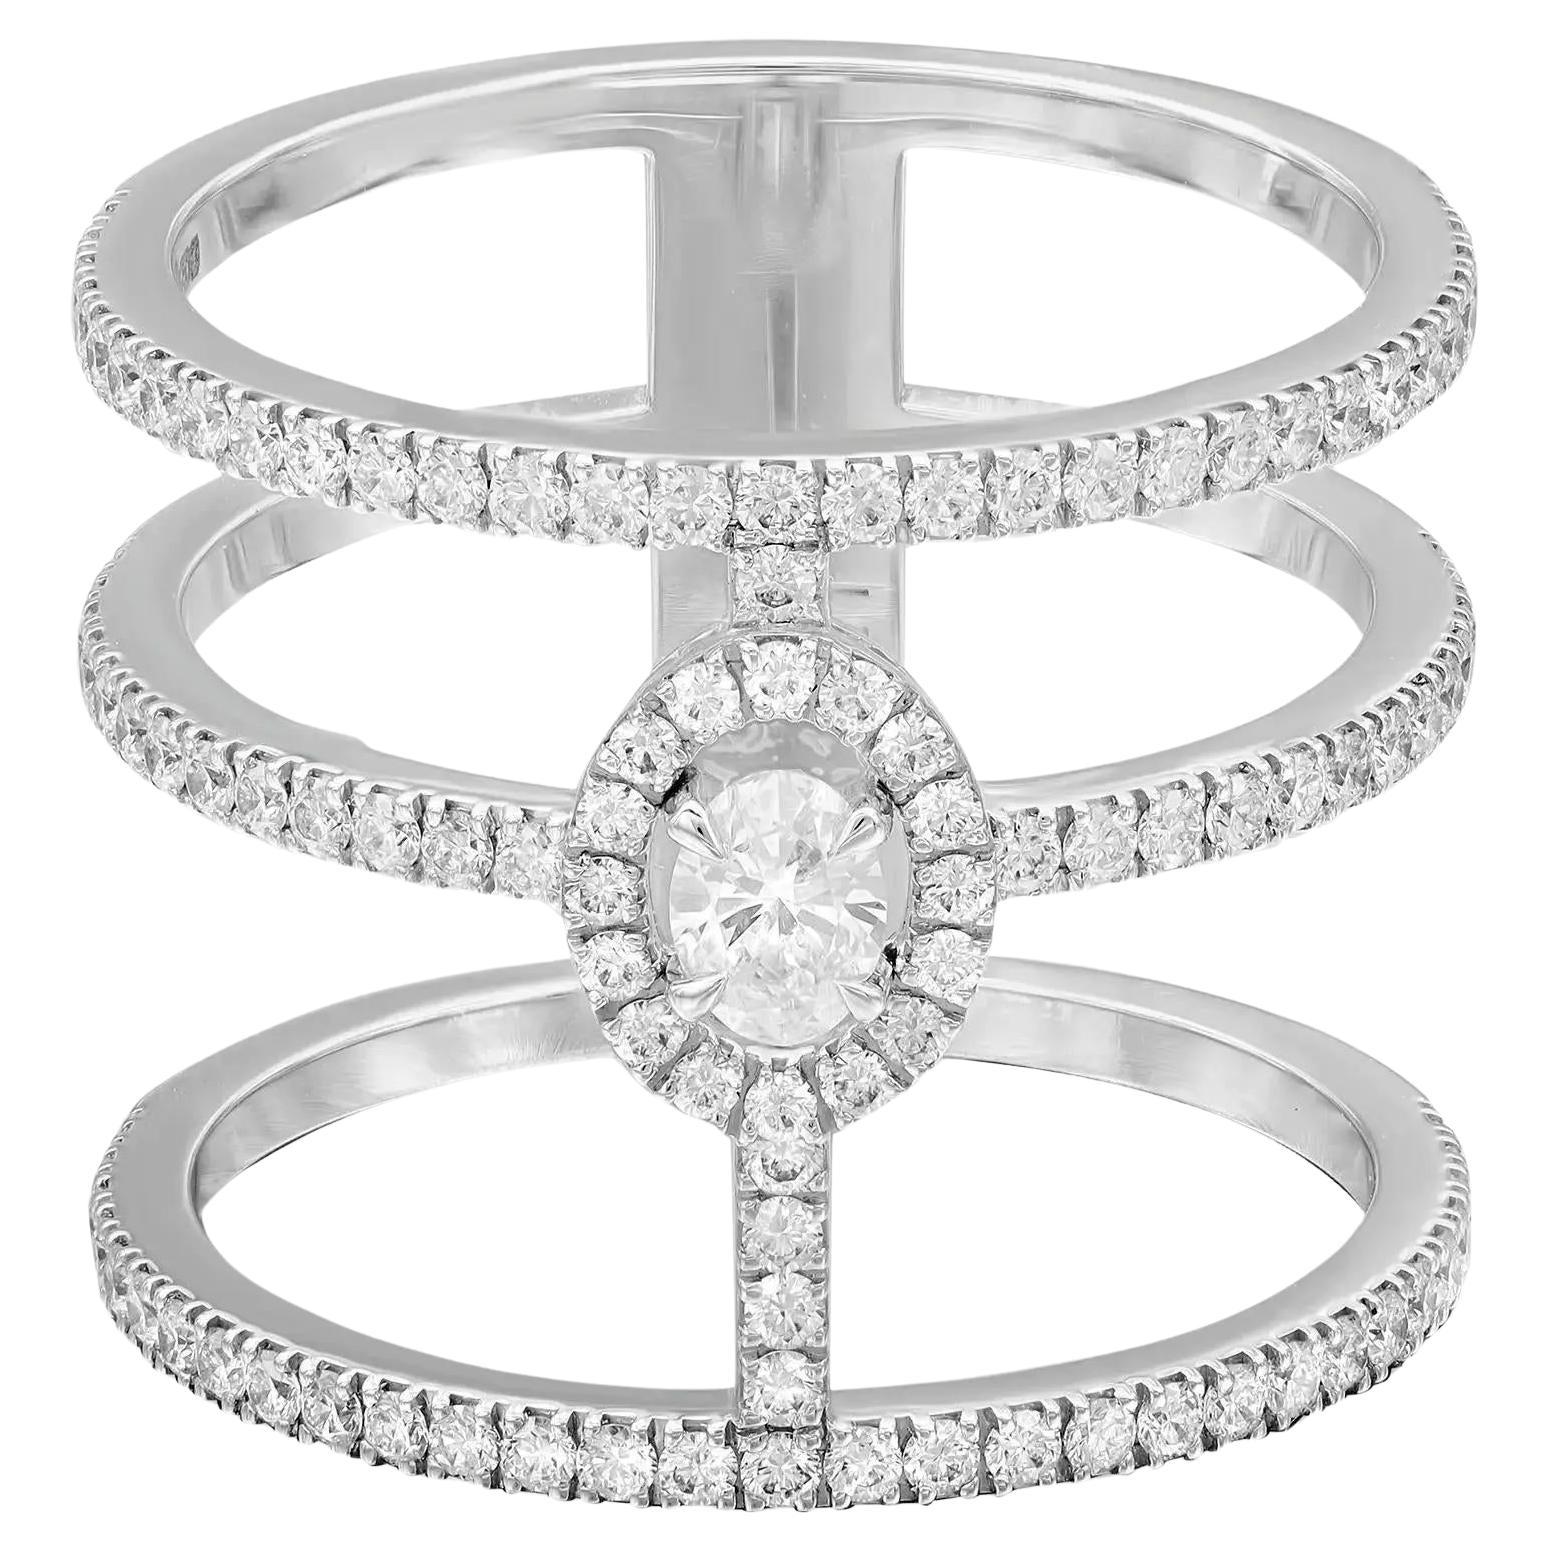 Messika 0.69Cttw Glam'Azone 3 Row Diamond Band Ring 18K White Gold Size 54 US 7 For Sale